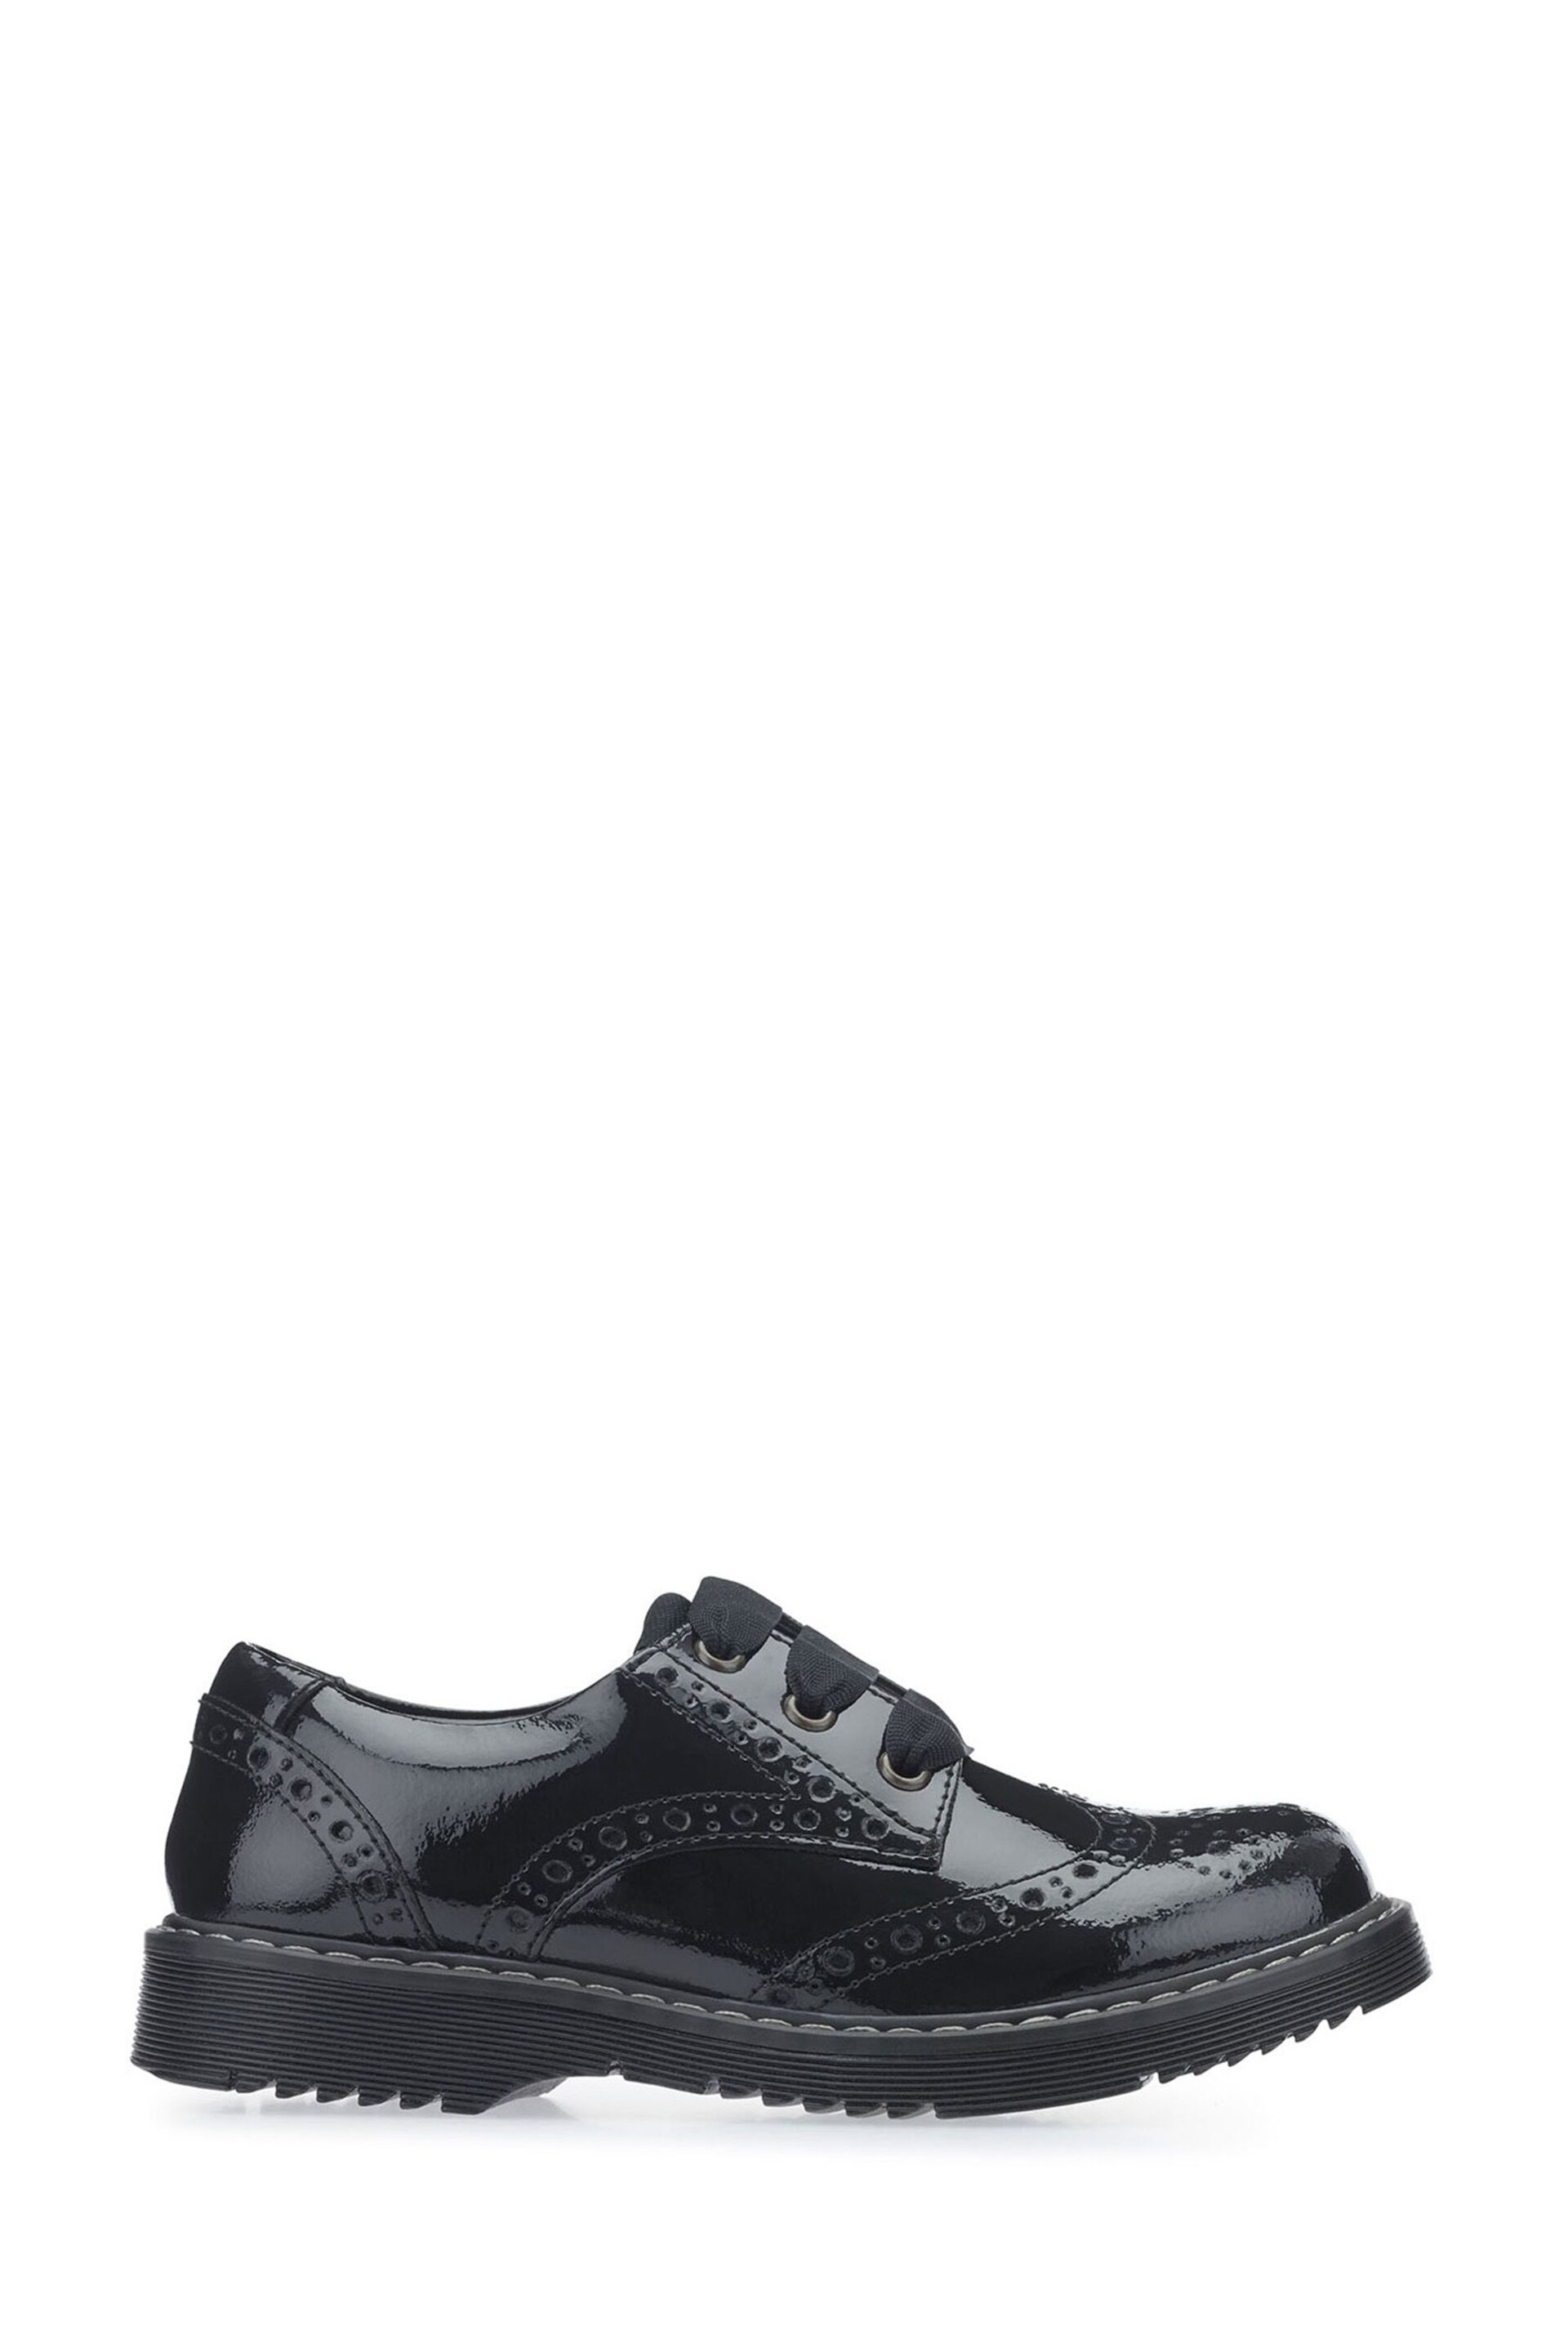 Start-Rite Impulsive Black Patent Leather School Shoes Wide Fit - Image 1 of 9